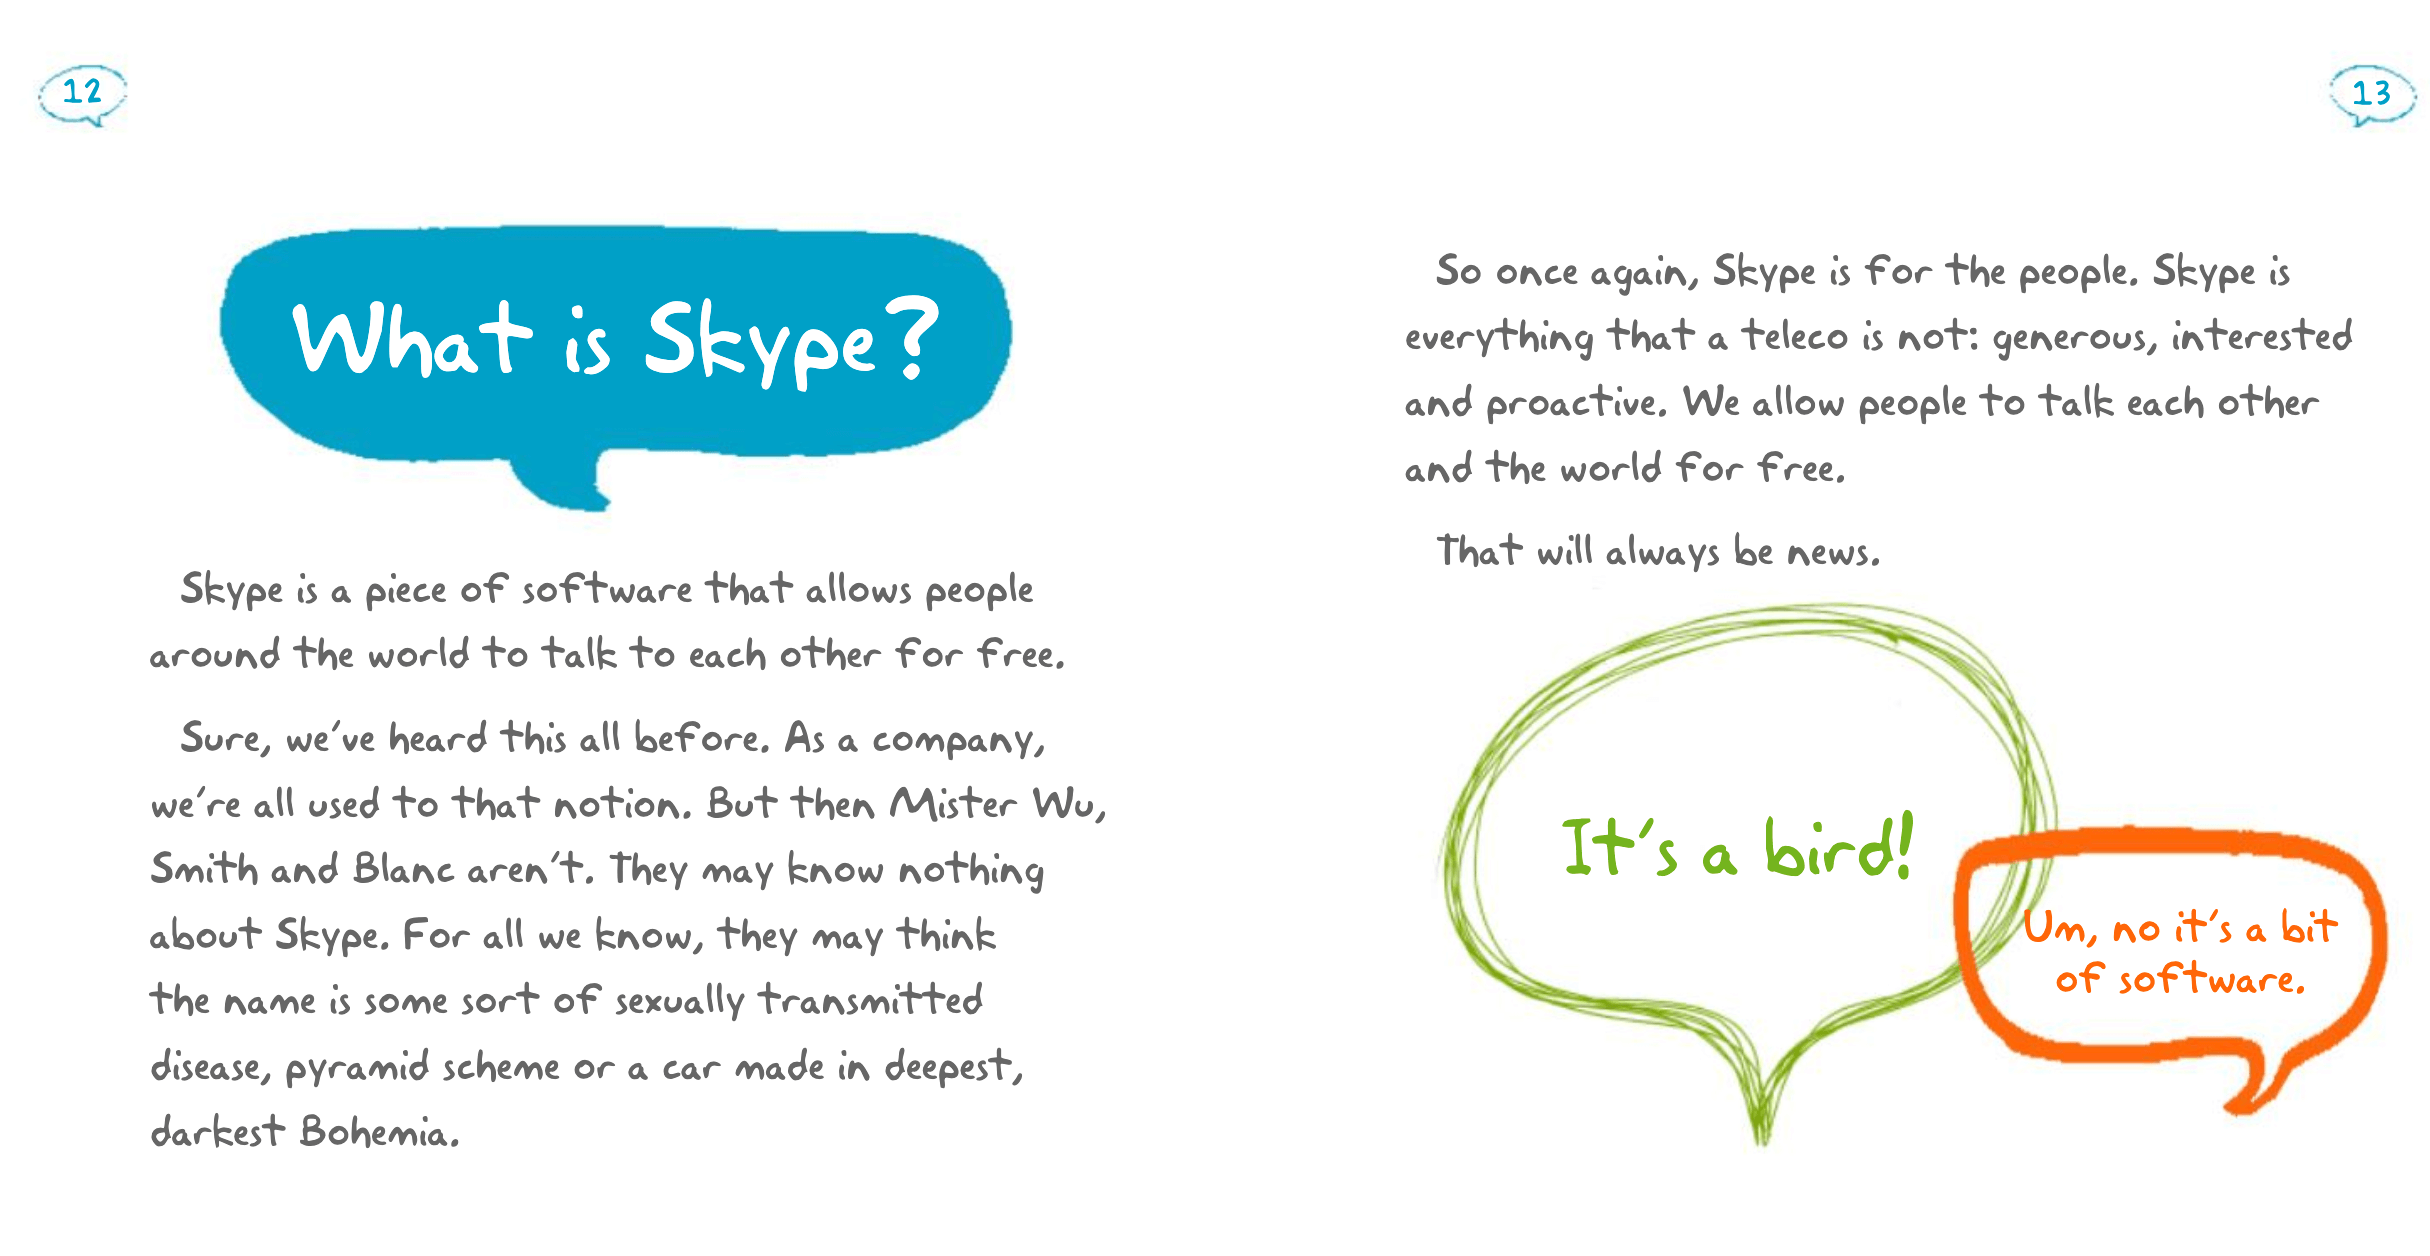 The "What is Skype?" page of the Skype brand guidelines